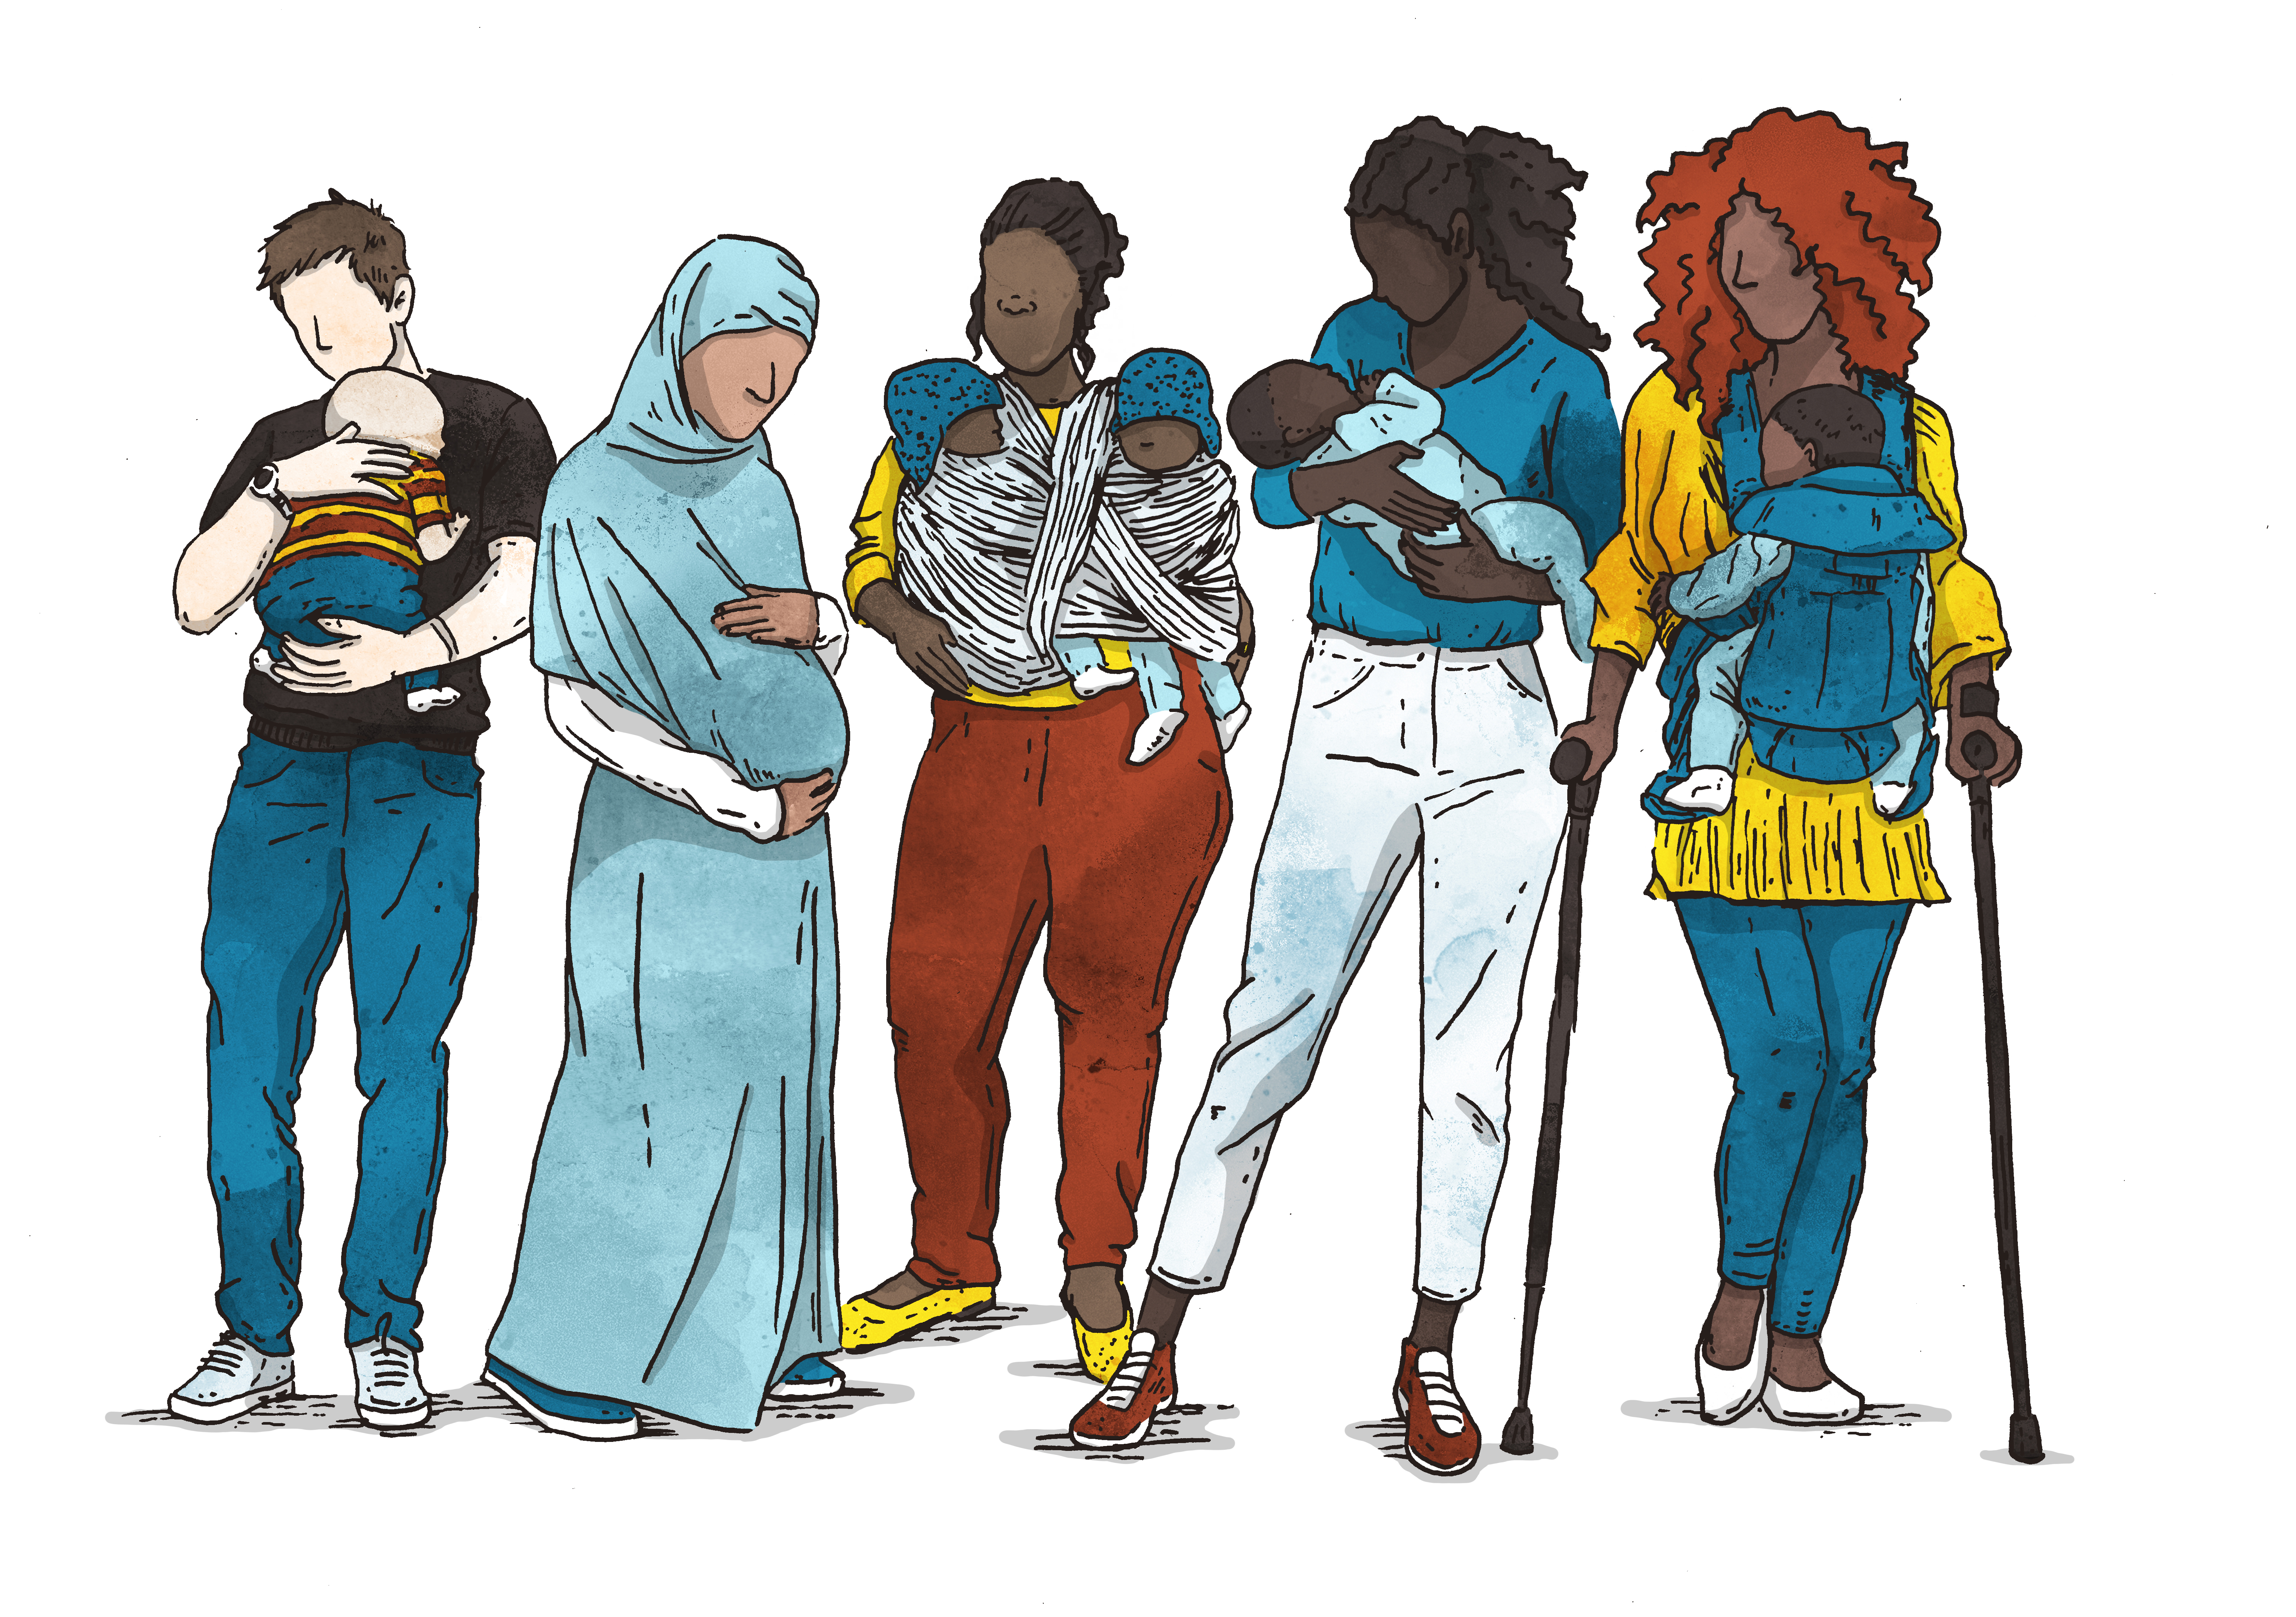 Five mothers—diverse in their races and ethnicities, body types, and gender presentation—stand together holding their babies. 